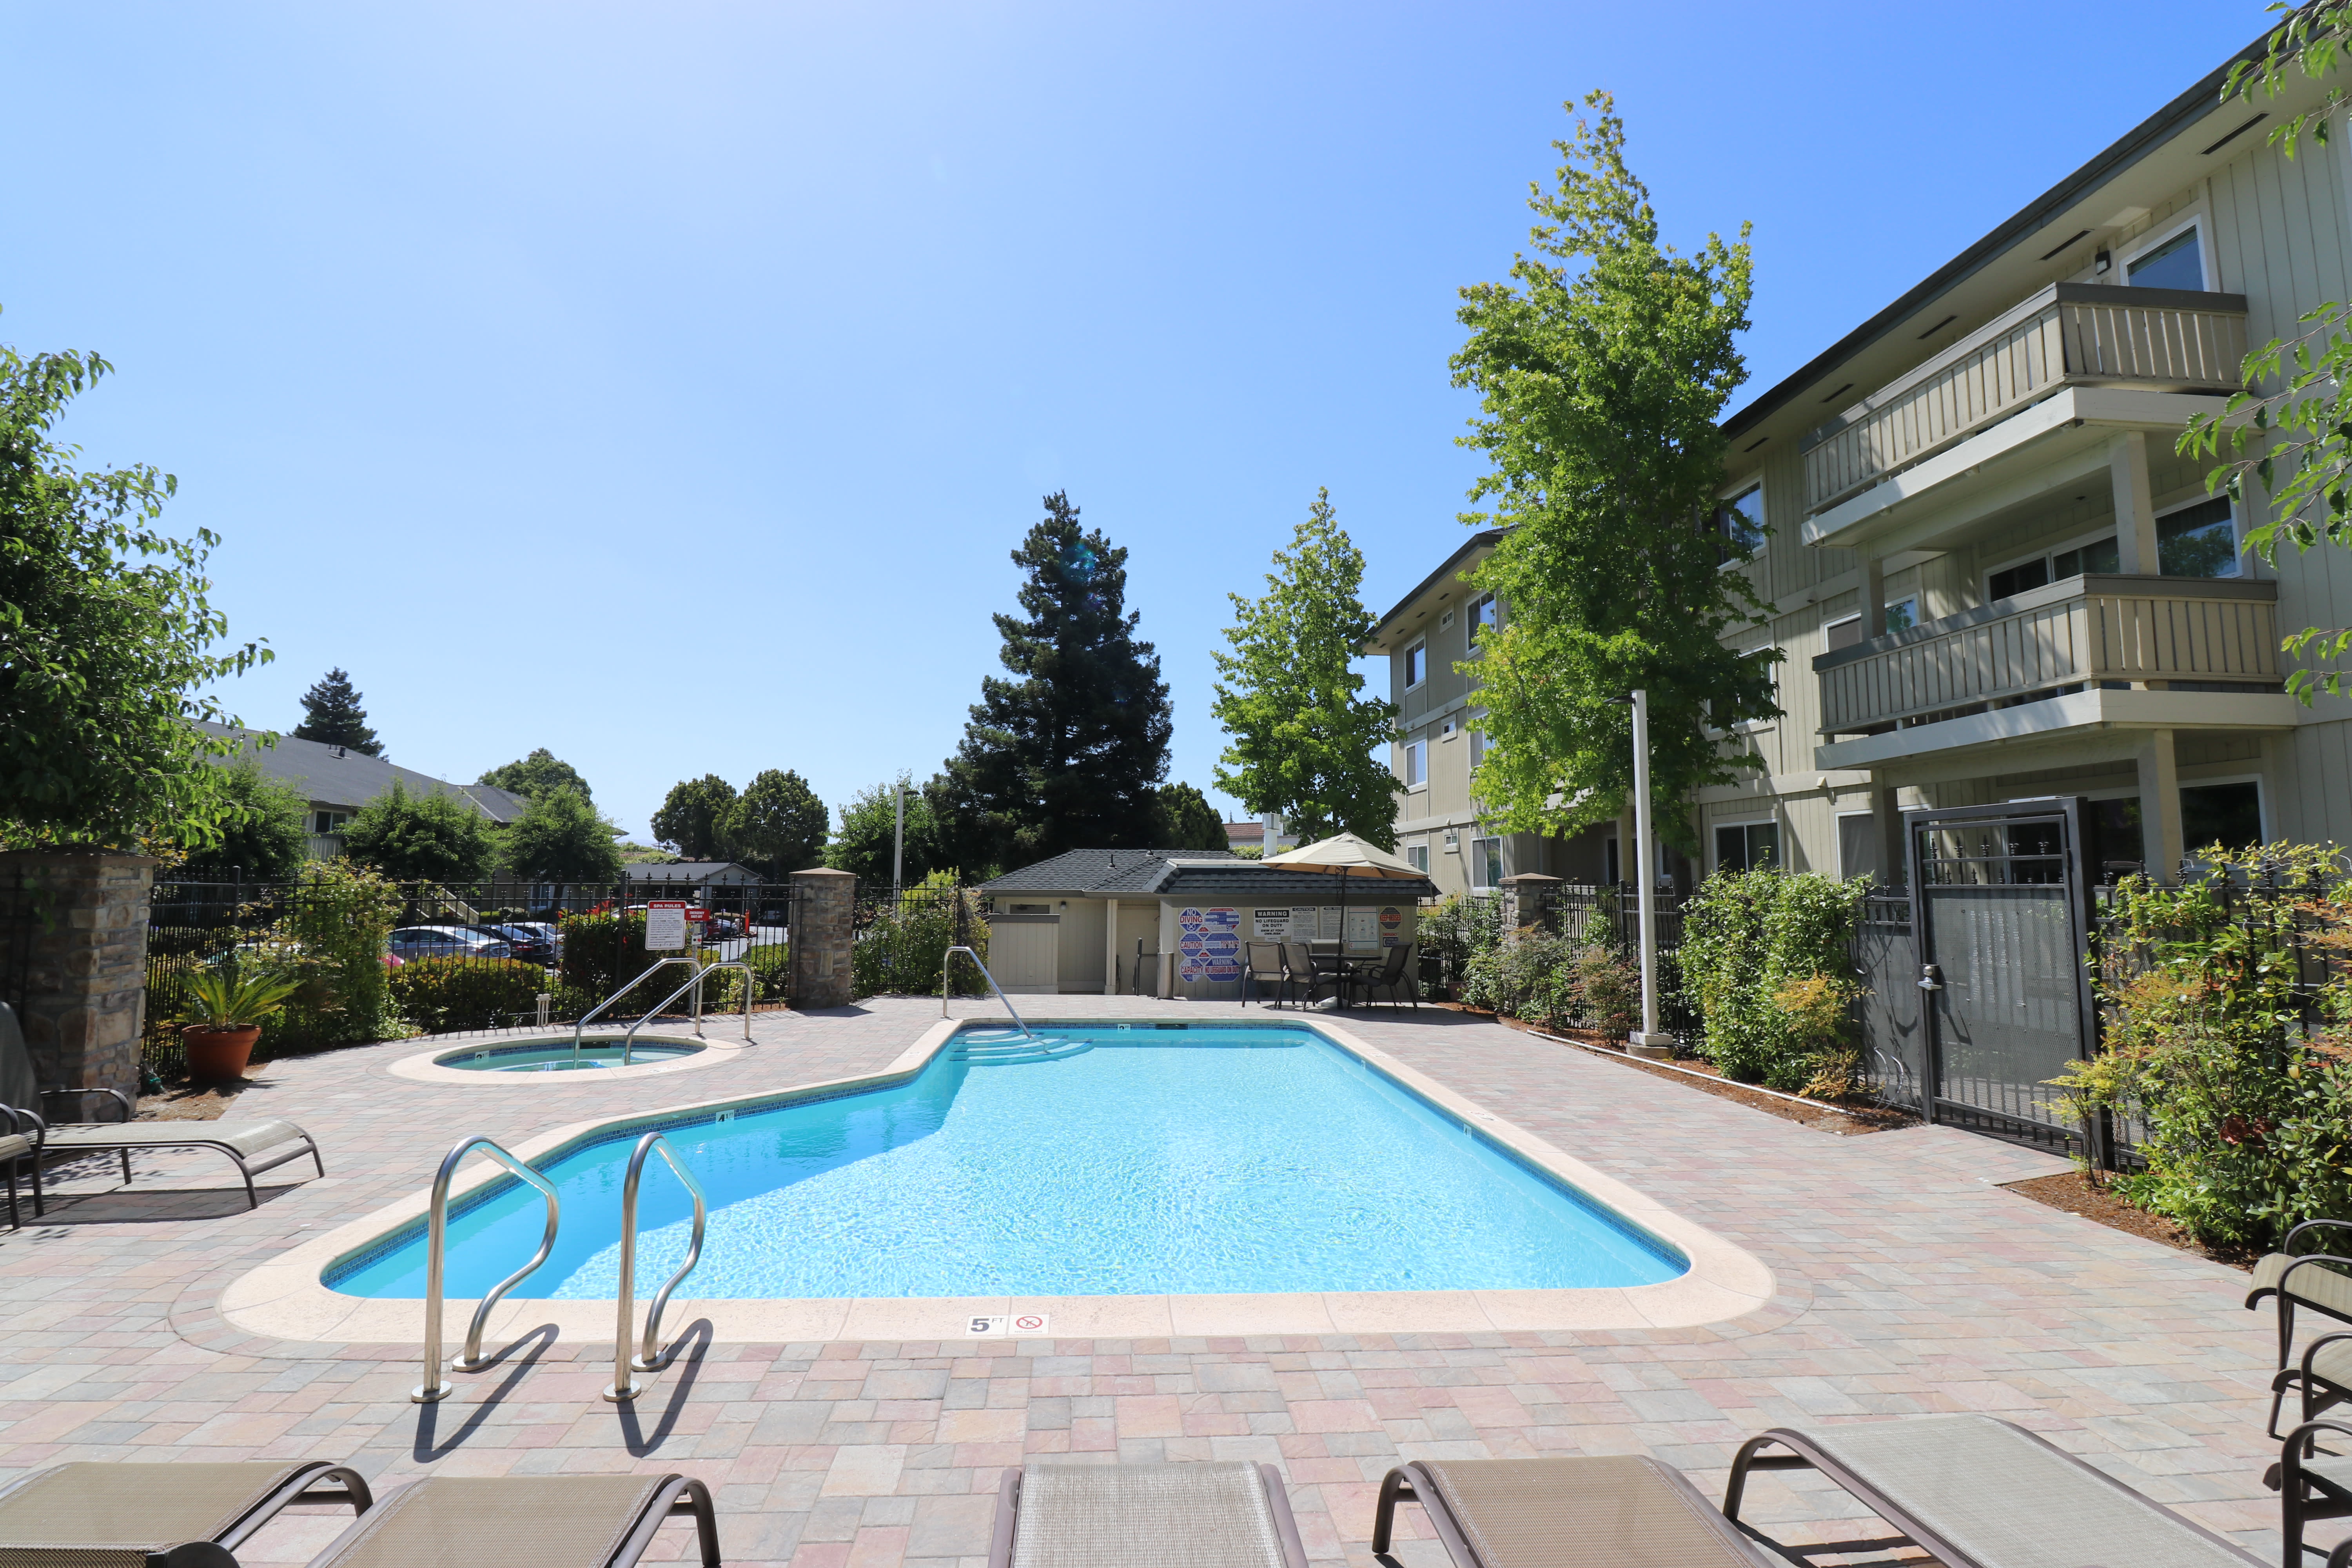 Chaise lounge chairs by the pool at Summerhill Terrace Apartment Homes in San Leandro, California